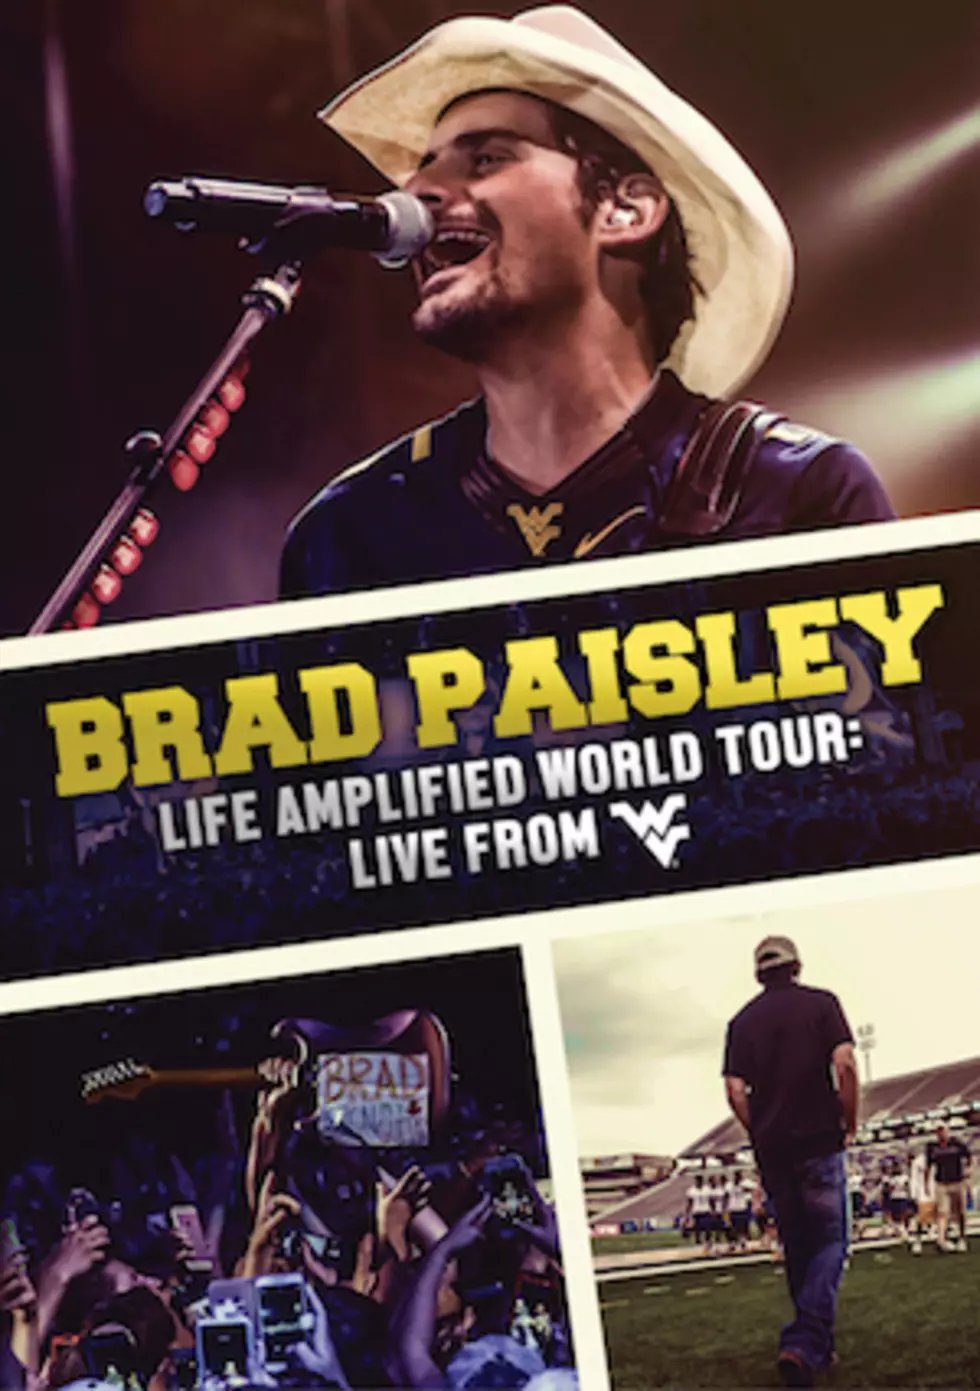 Brad Paisley to Release &#8216;Life Amplified World Tour: Live From WVU&#8217; CD / DVD